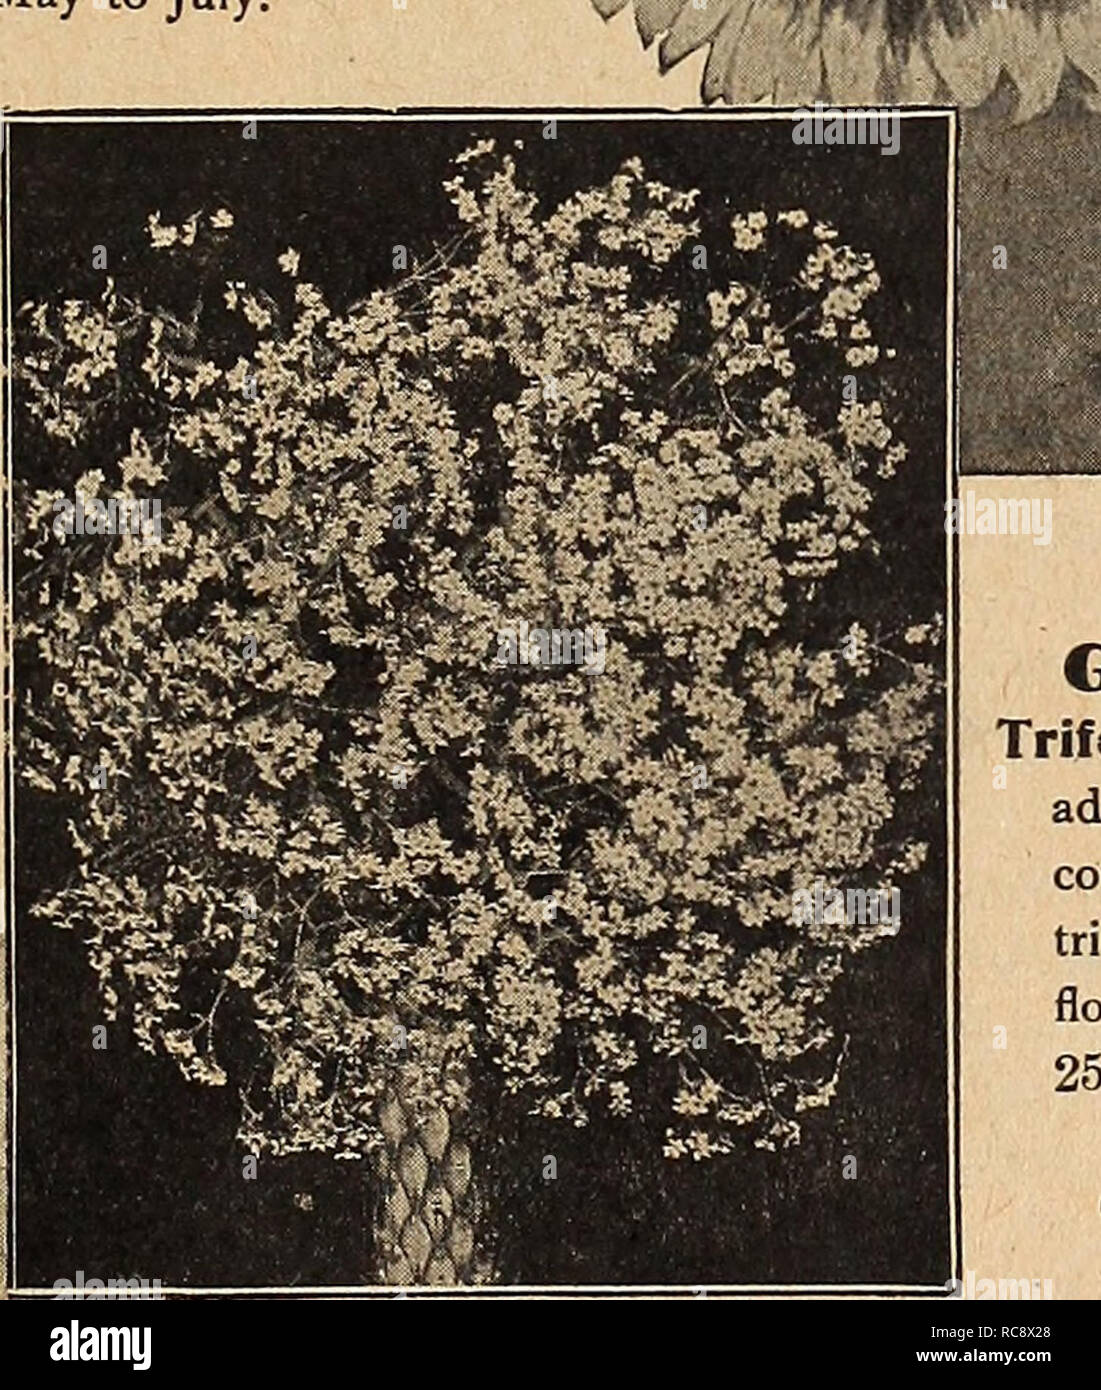 . Dreer's garden book 1920. Seeds Catalogs; Nursery stock Catalogs; Gardening Equipment and supplies Catalogs; Flowers Seeds Catalogs; Vegetables Seeds Catalogs; Fruit Seeds Catalogs. Gypsophila Paniculata Geum Gaillardia Grandiflora. Gilleilia (Bowman's Root) Trifoliata. A strong-growing perennial; admirable for the border or for use in connection with shrubs, with handsome trifoliate foliage and numerous white flowers, tinged with pink; July; 3 feet. 25 cts. each; $2.50 per doz. GLECHOMA, OK NEPETA Variegata (Variegated Groundsel, or Ground Ivy.) A most useful variegated creeper for growing  Stock Photo